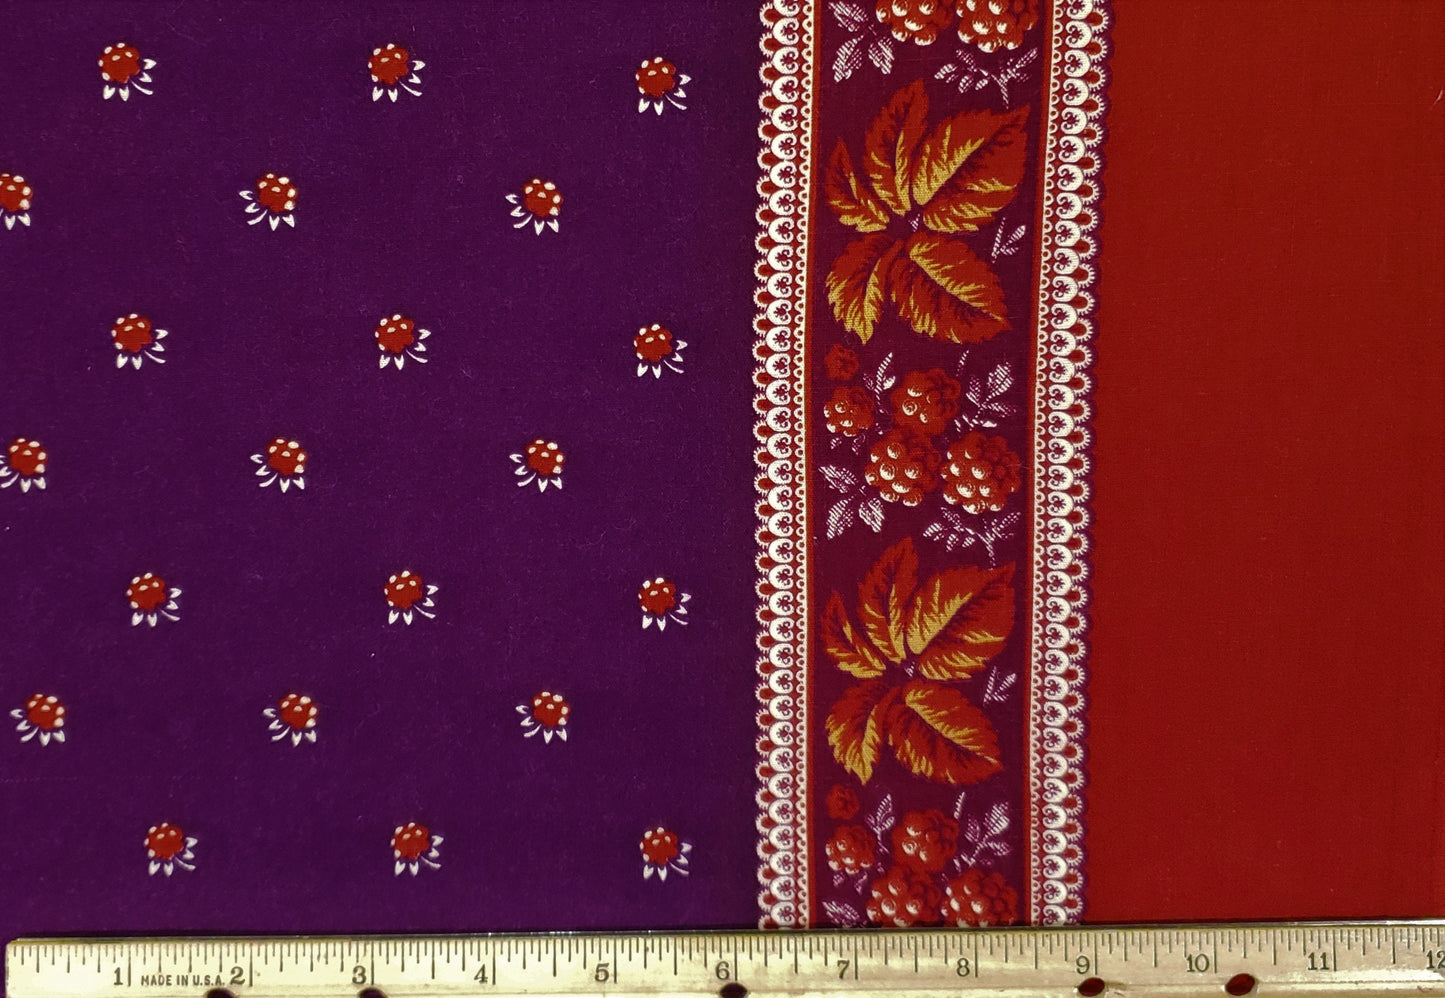 Autumn Single Border Fabric-Appr 3" Wide Rust Border on One Selvage/2-1/2" Rust and Plum Leaf & Berry Stripe/Scattered Berries on Dark Plum